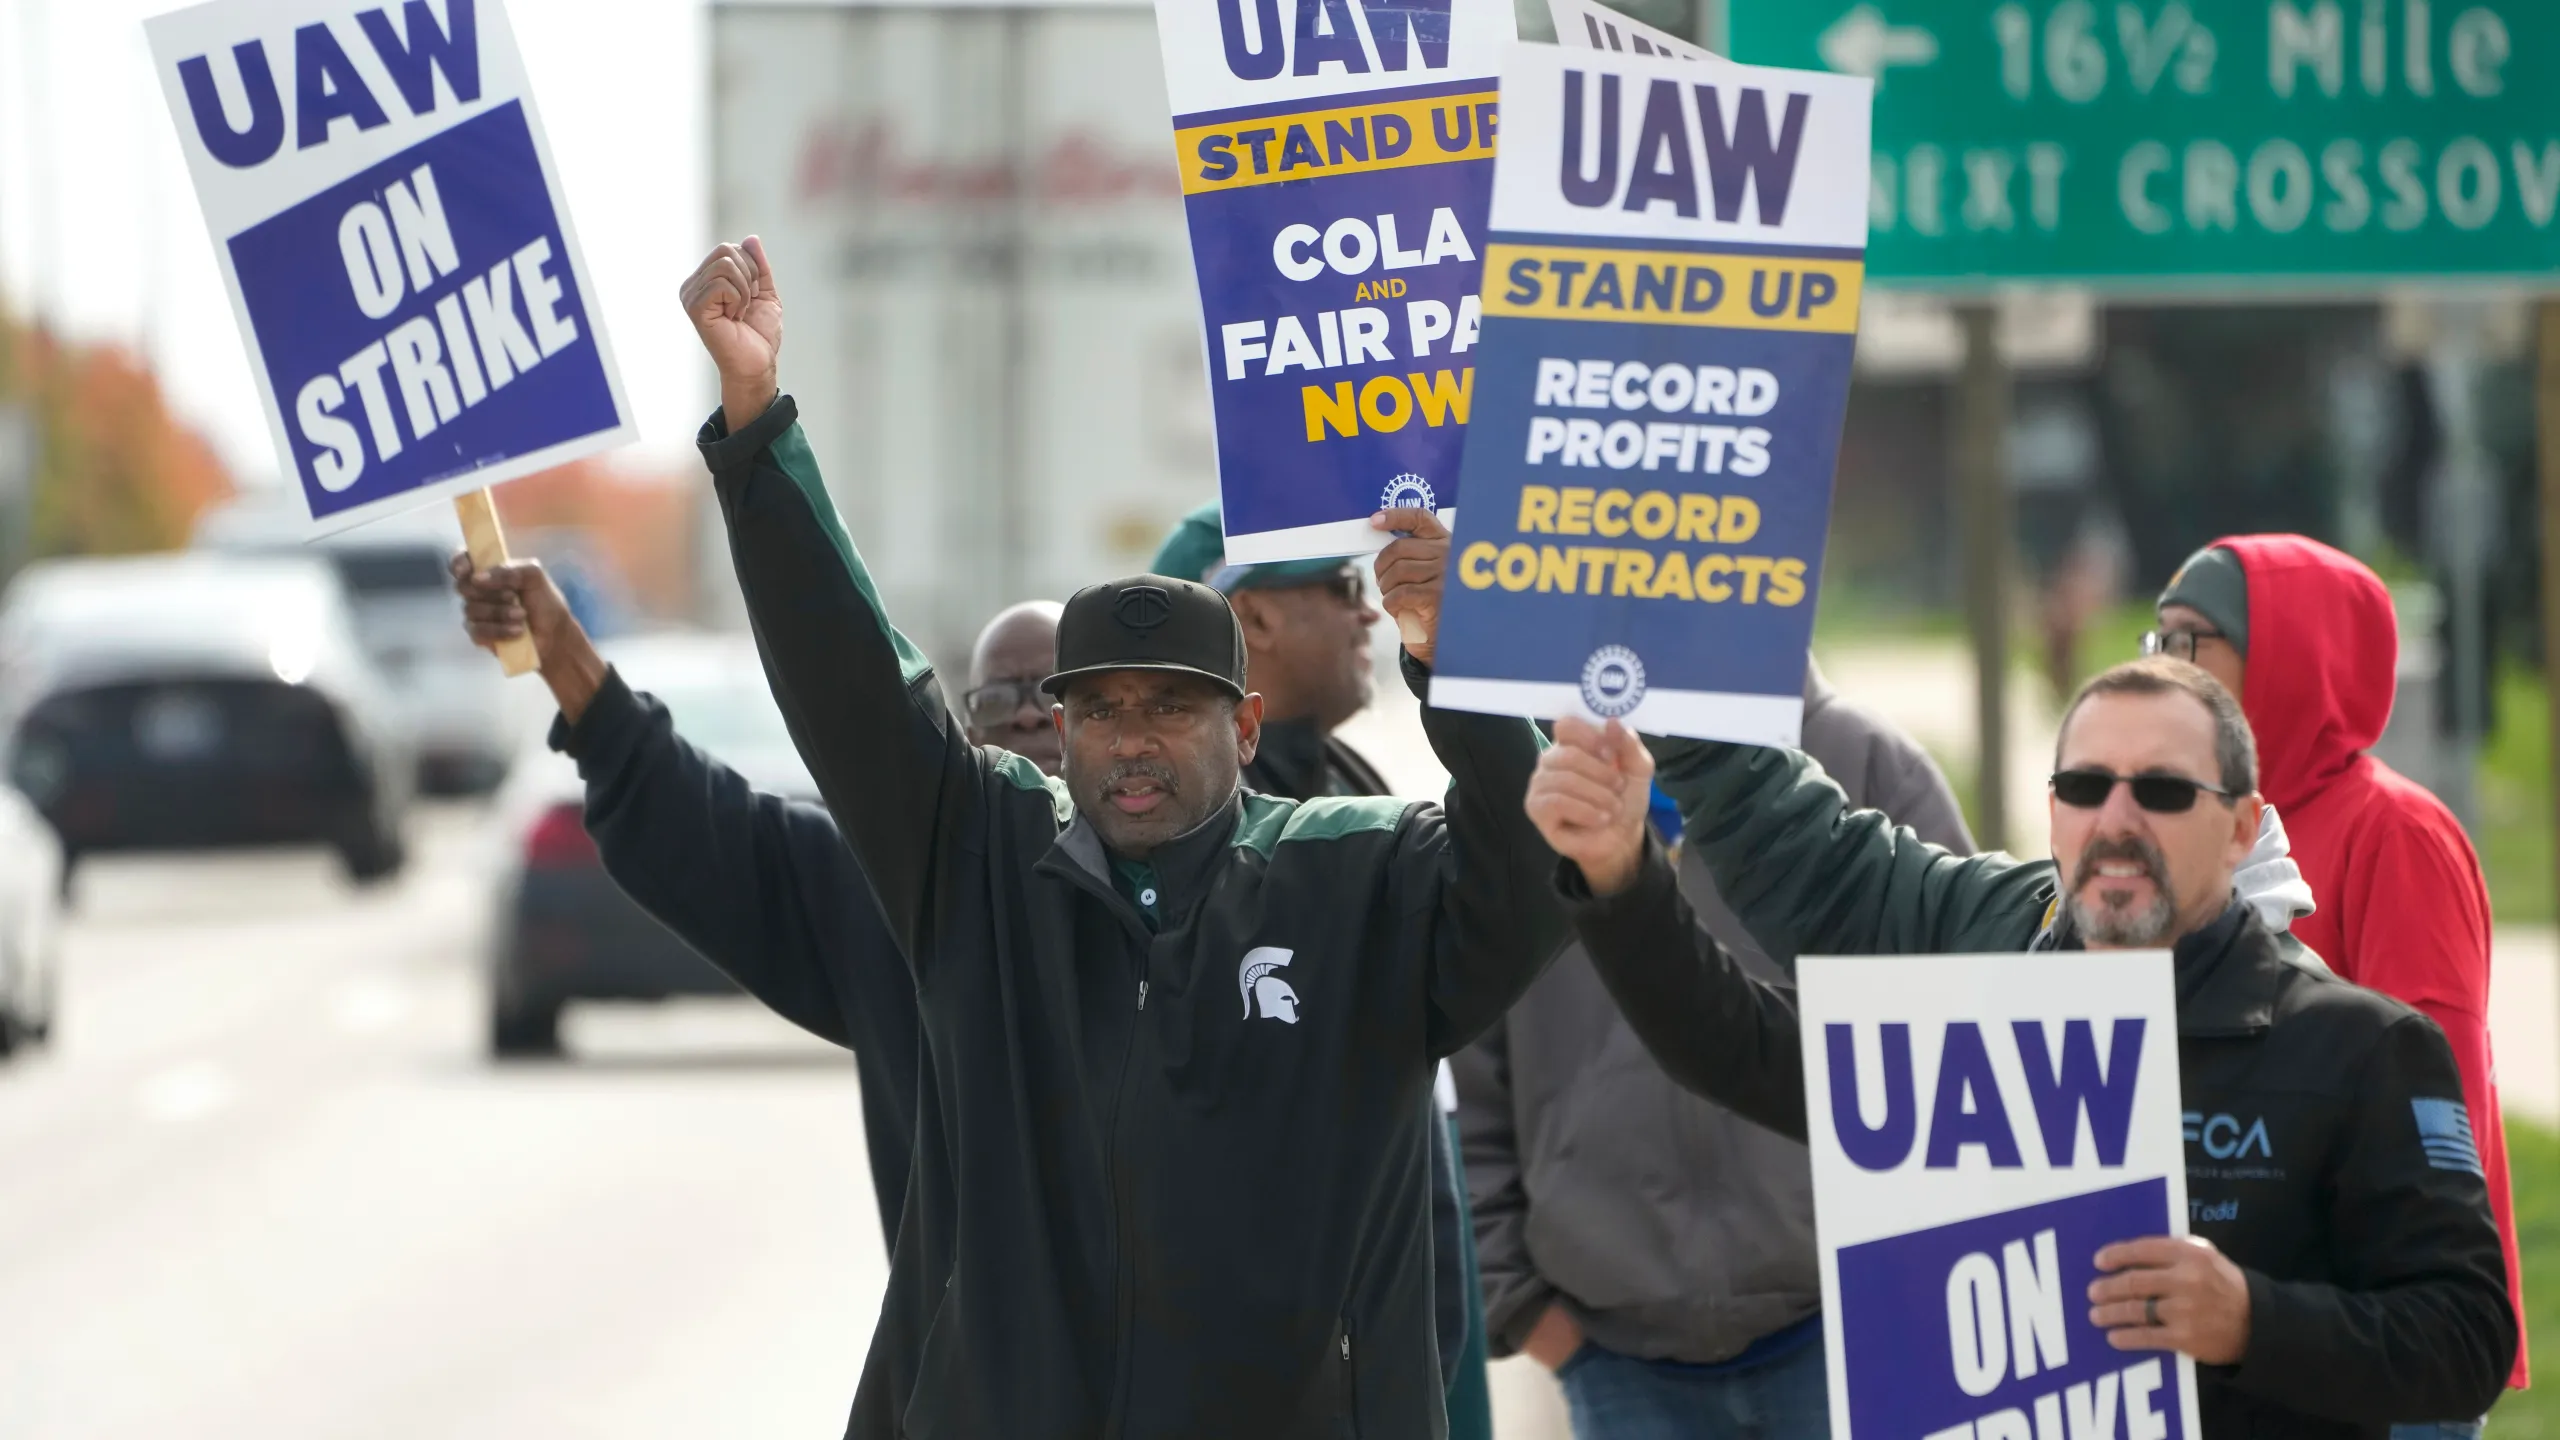 Workers await UAW's verdict on potential strike against Daimler (Credits: NewsNation)